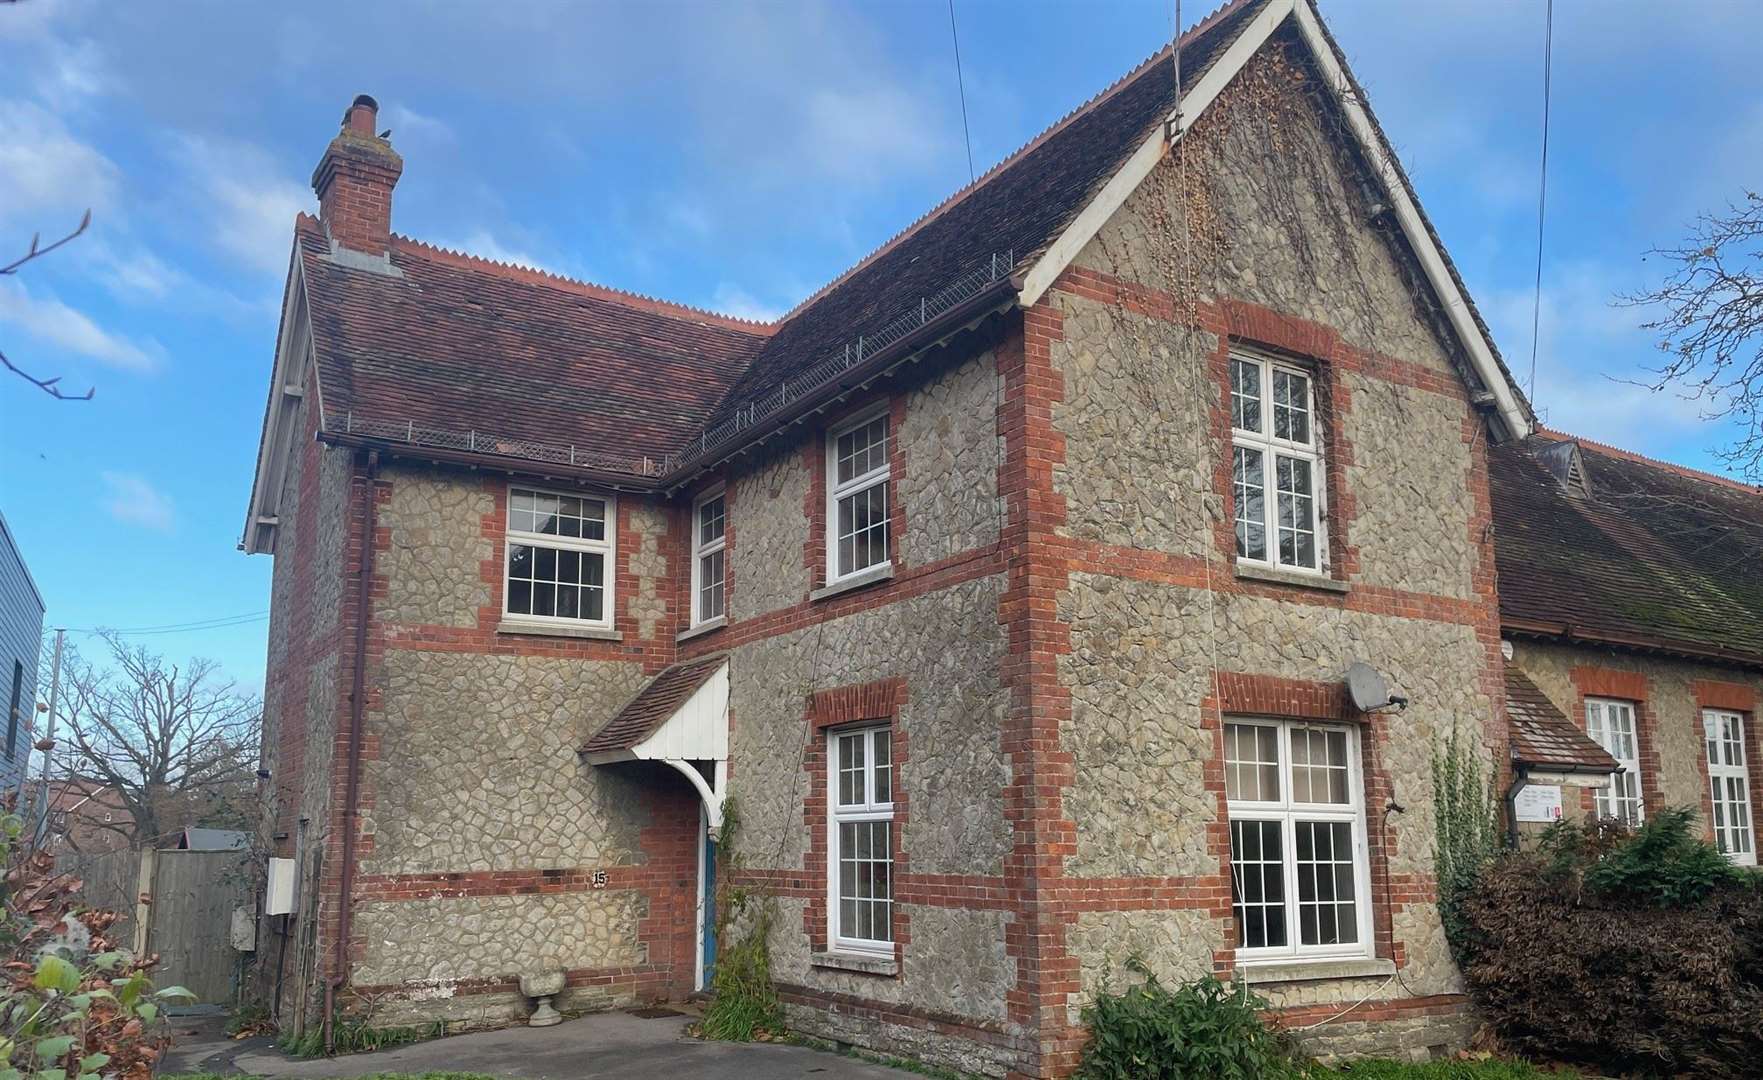 This Kentish ragstone house in Headcorn sold for £324,000.